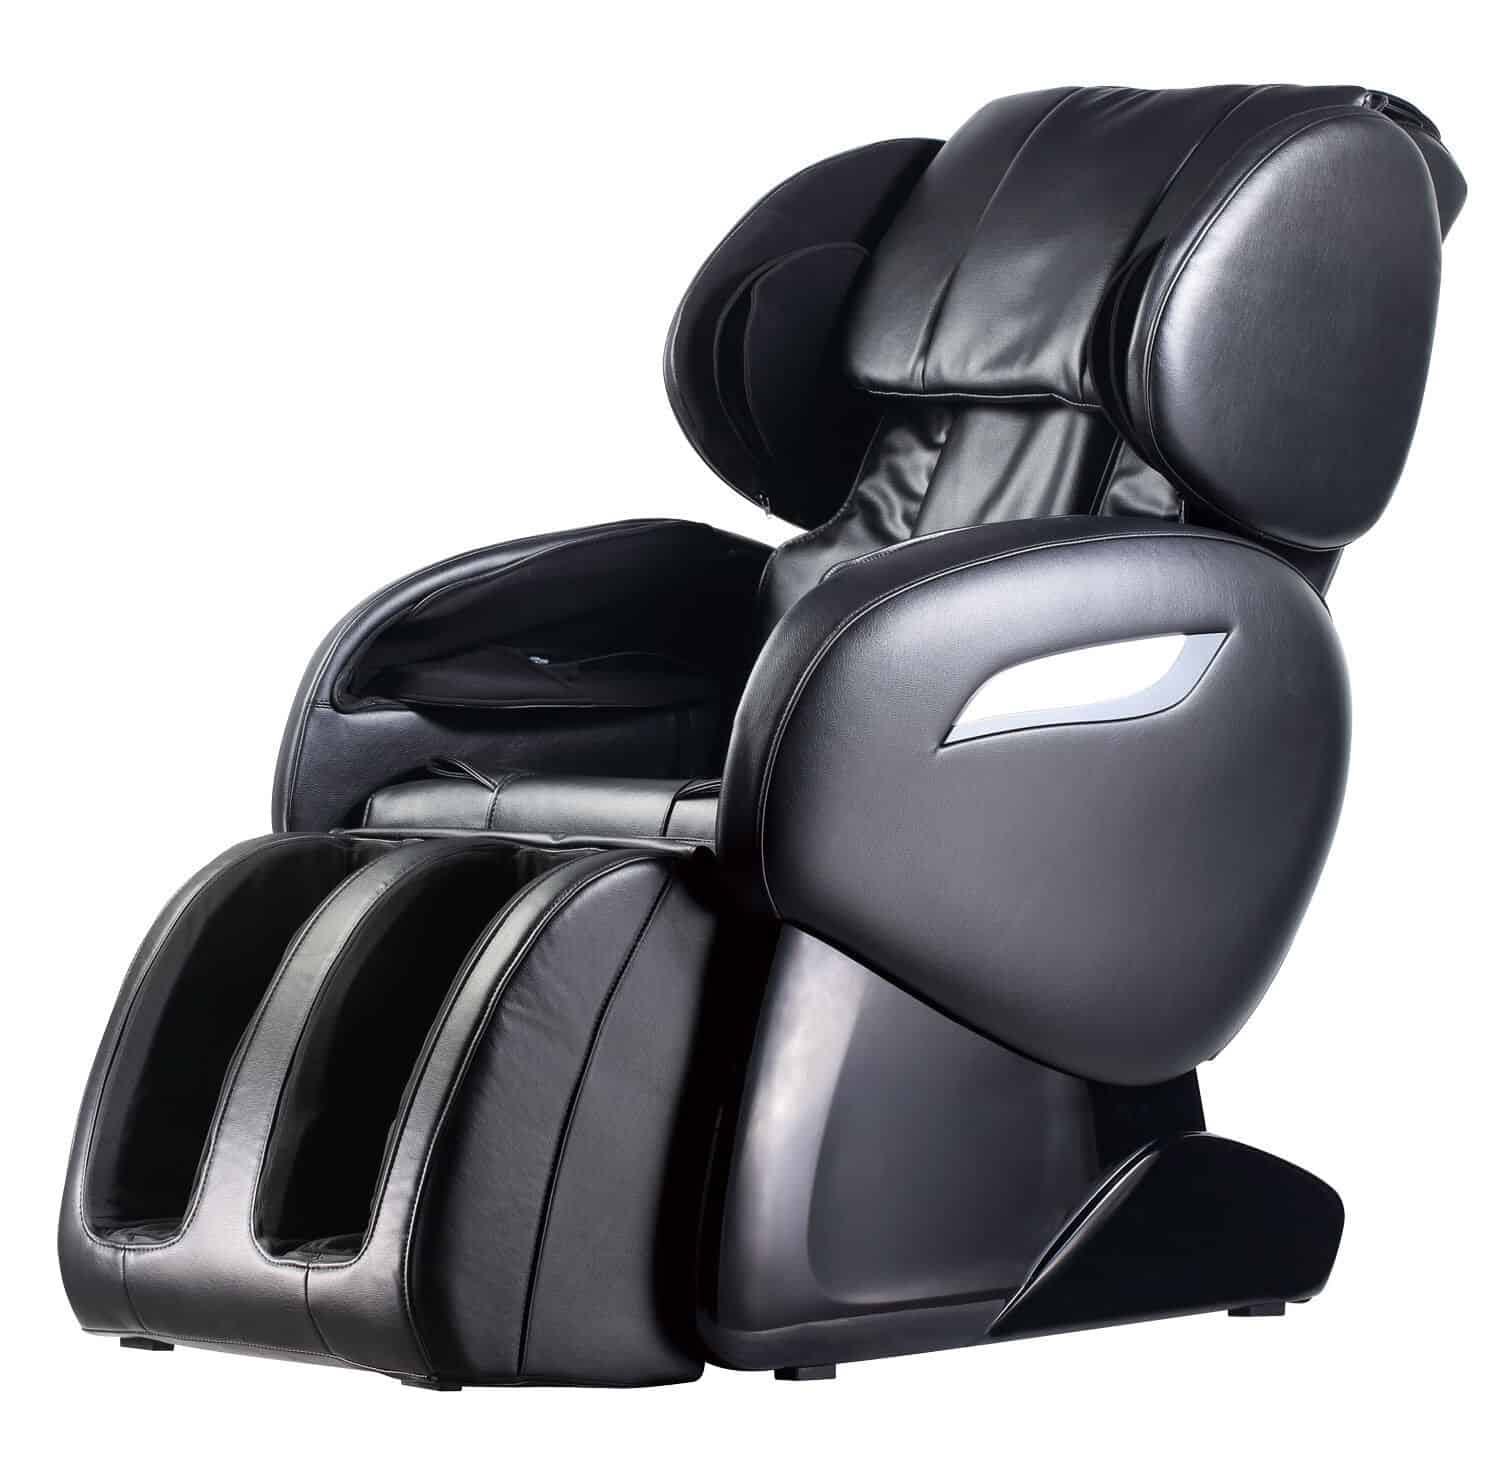 A black massage chair on a white background.